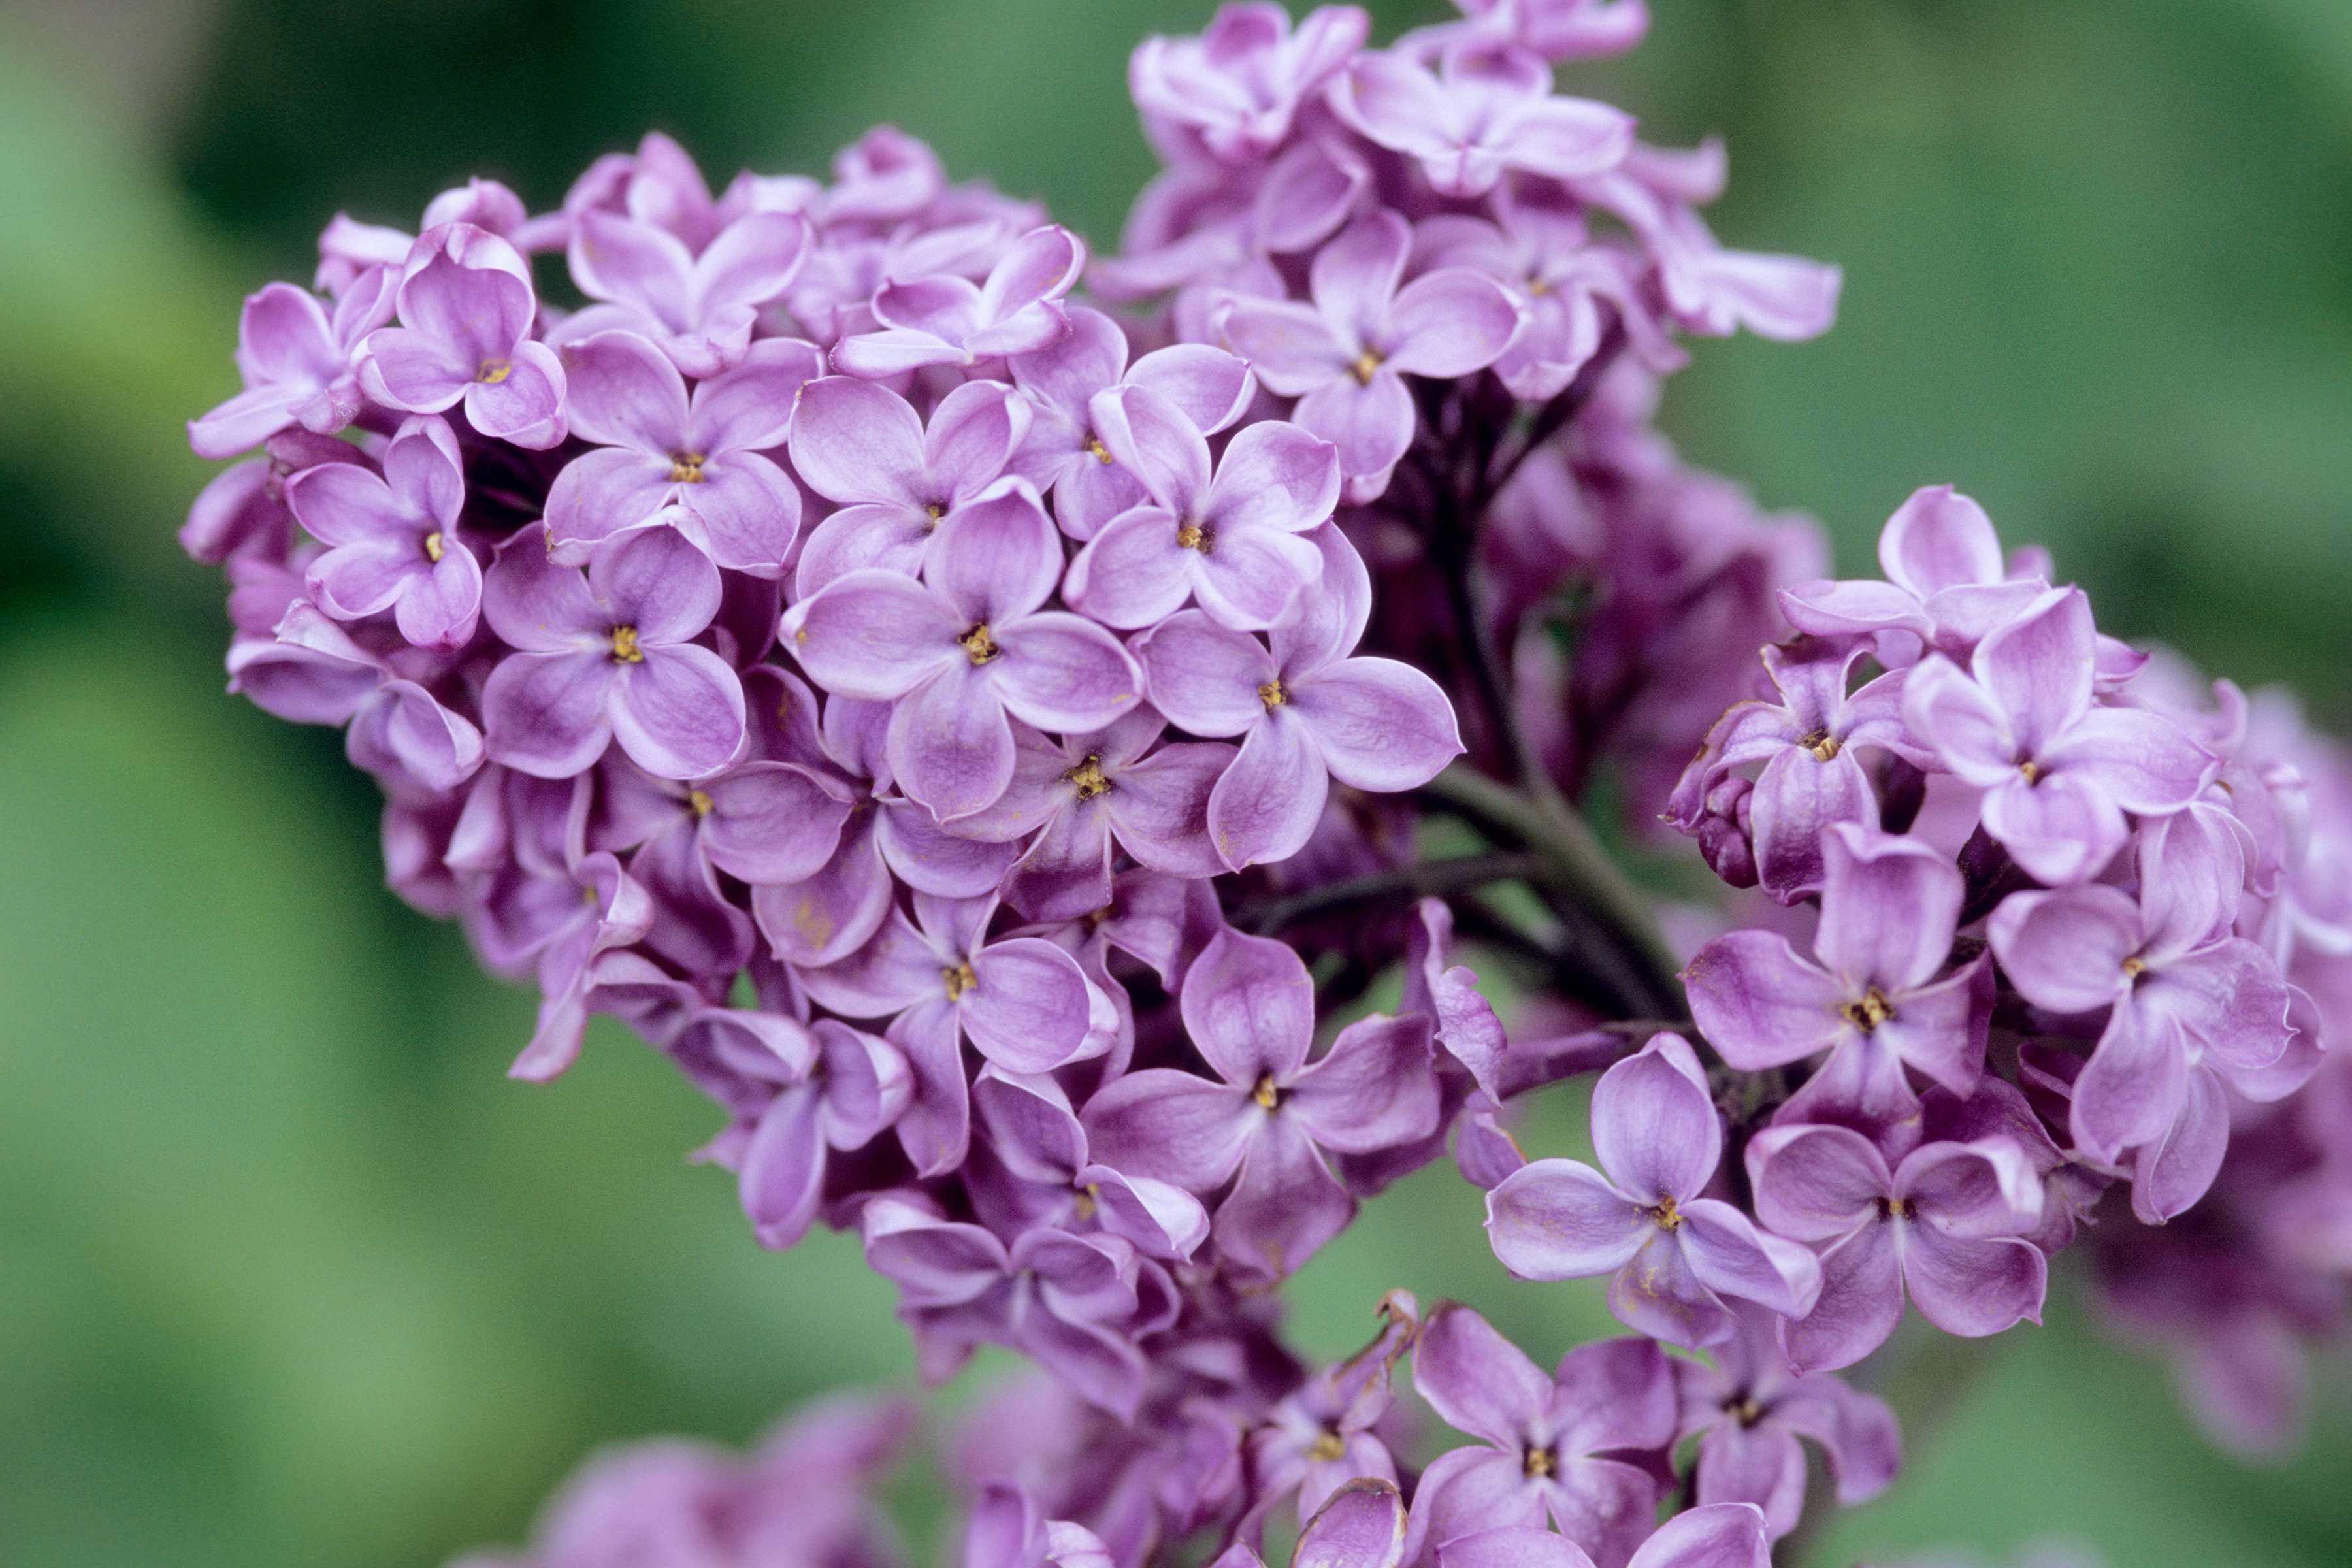 Lilac Sunday at the Arnold Arboretum Sunday, May 10th - Cervone ...